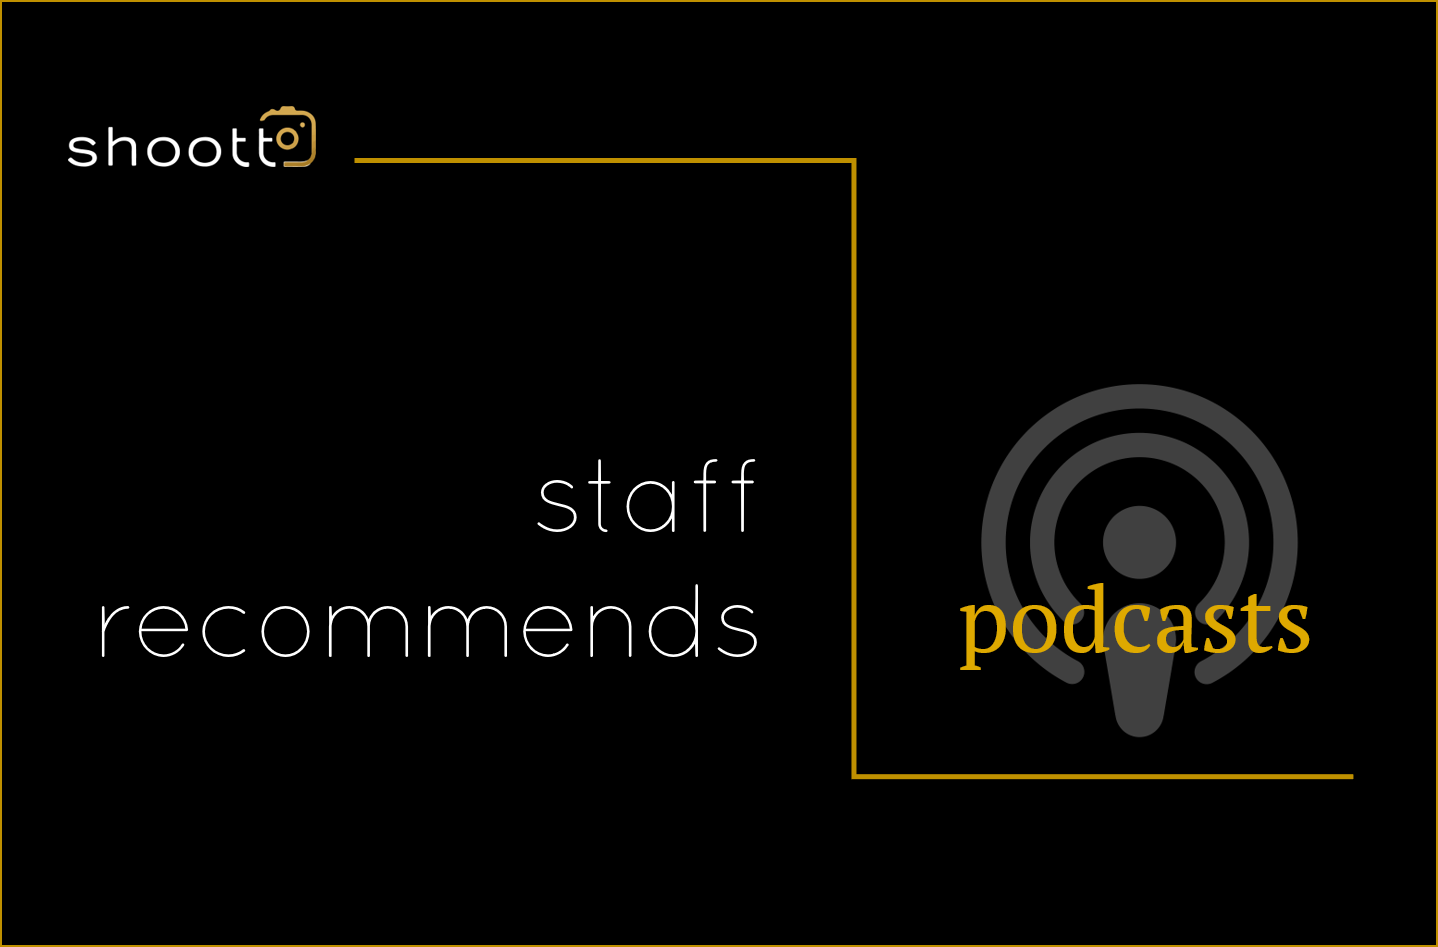 A graphic with the words 'staff recommends podcasts' next to a headphone icon.